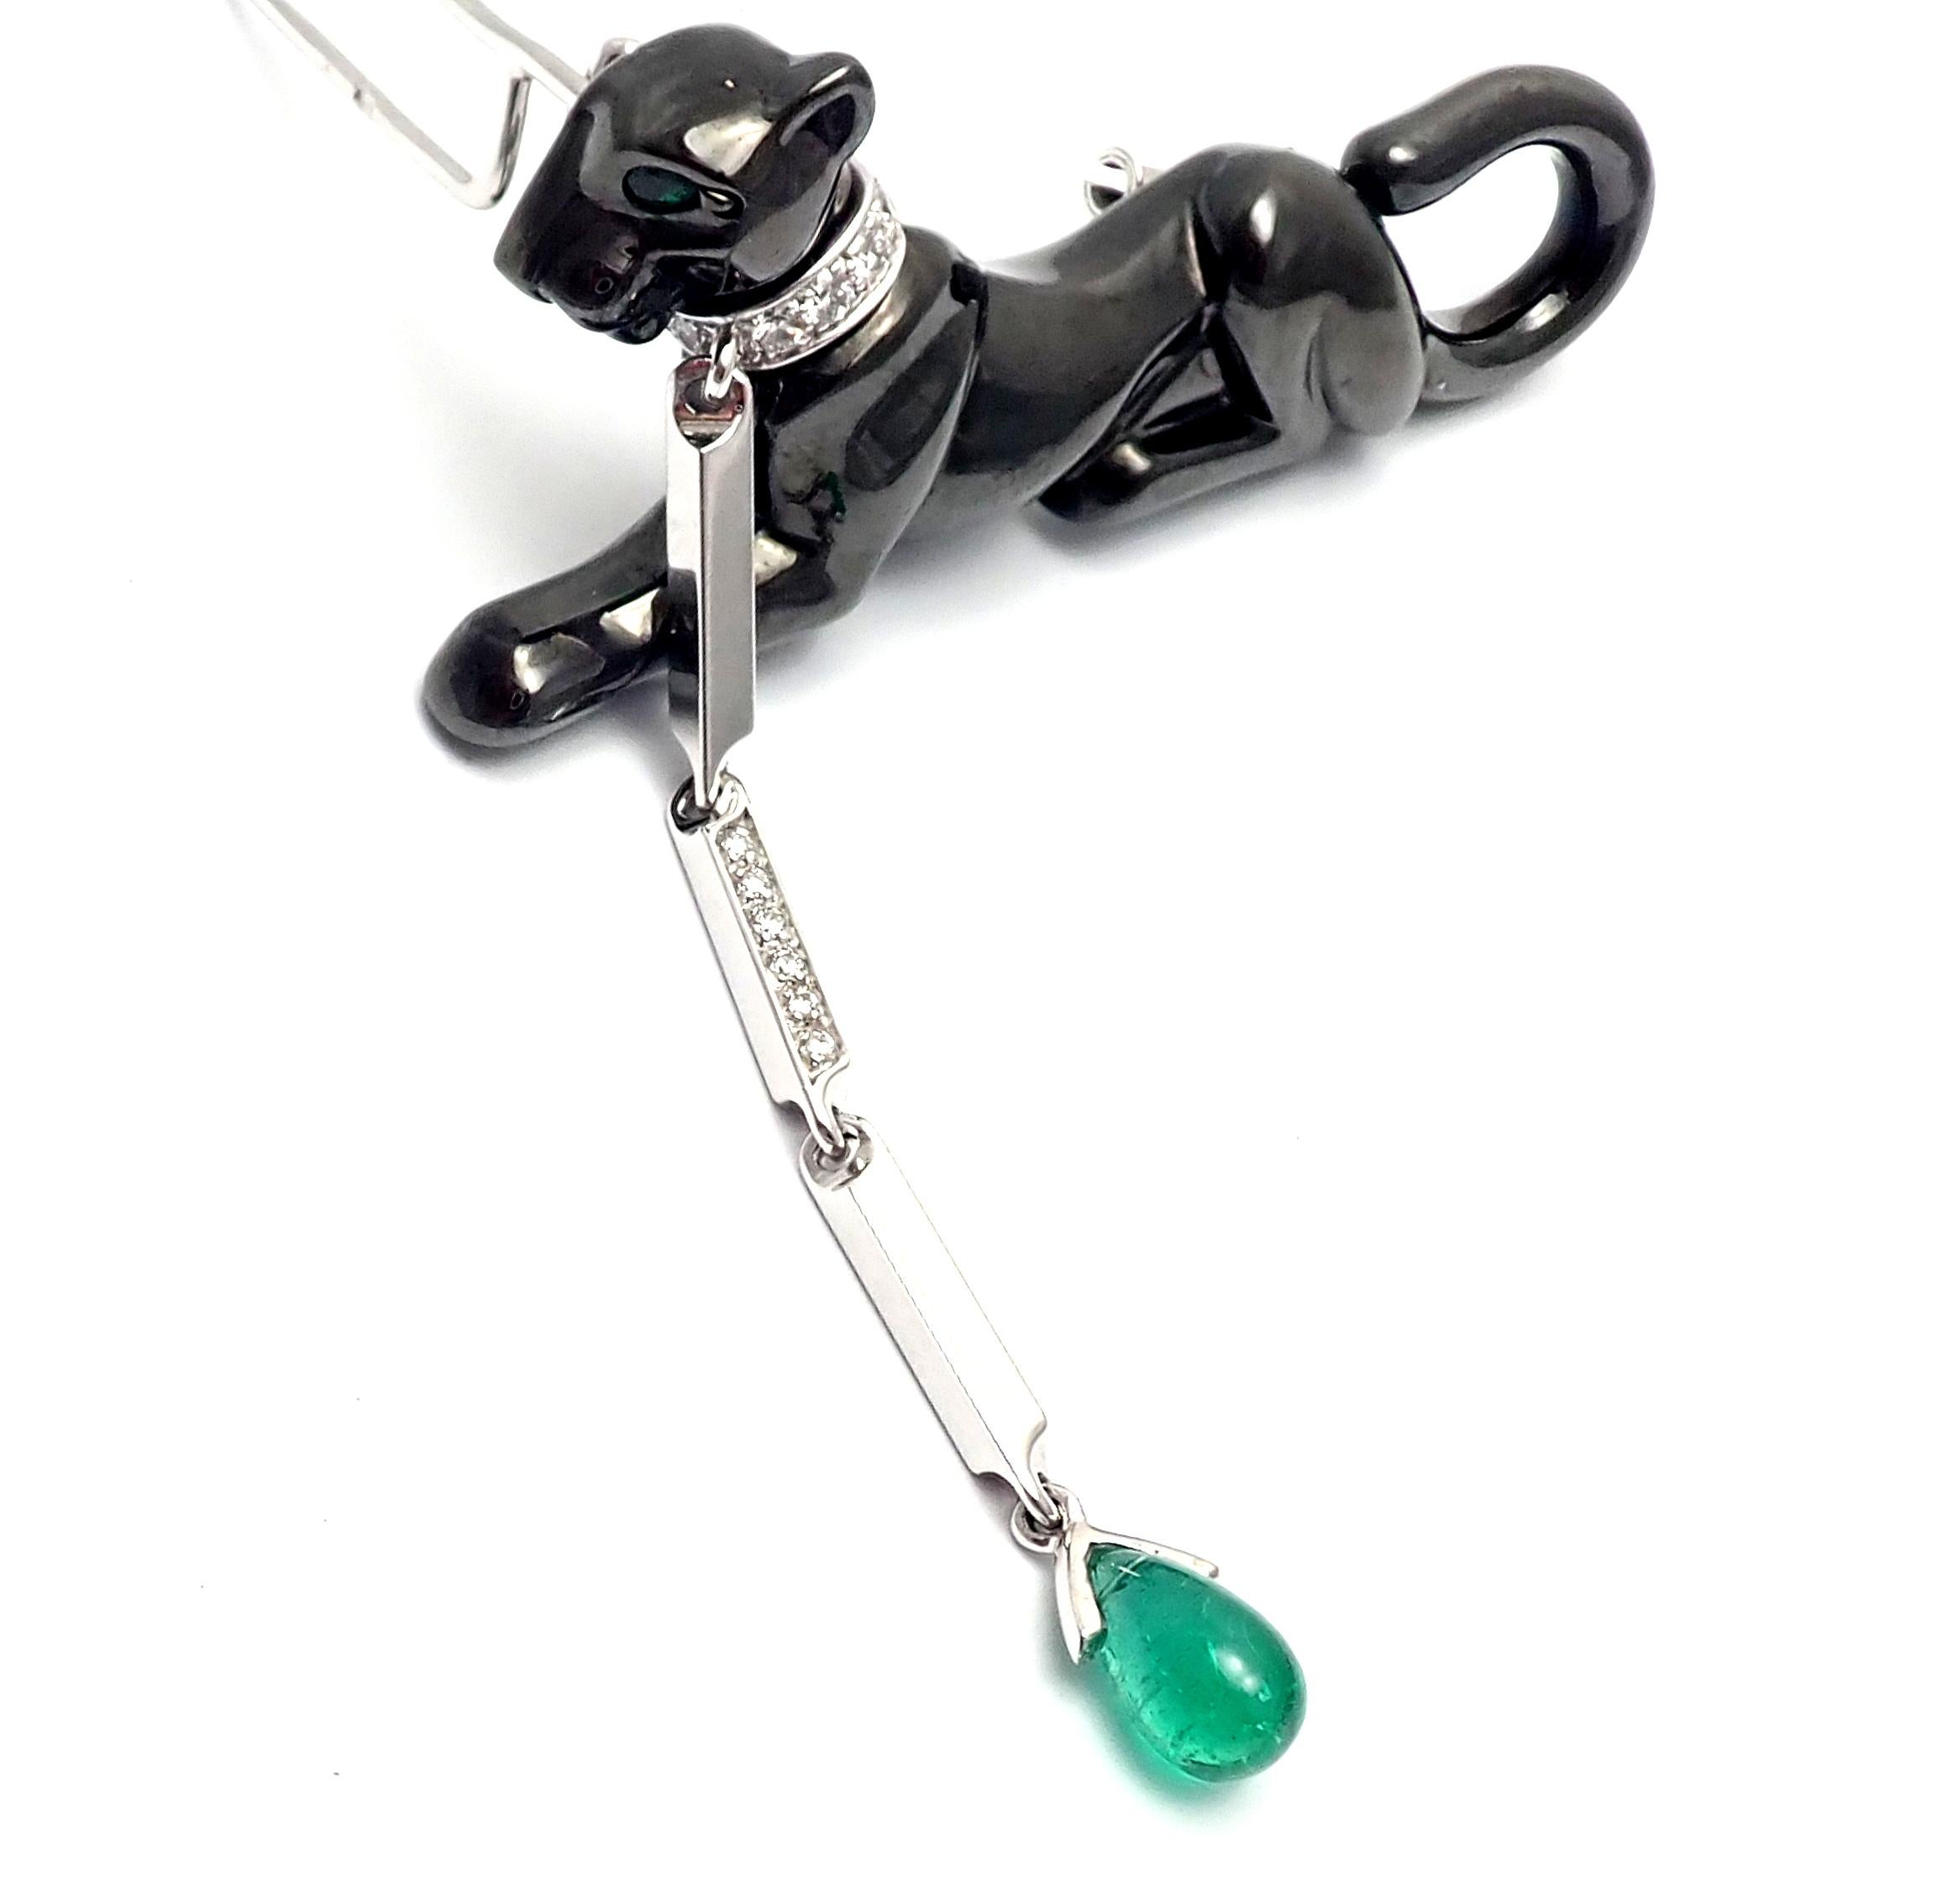 18k White Gold Diamond, Black Onyx nose and Emerald Panther  Pin Brooch by Cartier.  
With 12 round brilliant cut diamonds VVS1 clarity, E color total weight approx. .25ct
Emerald eye and an emerald drop.
This brooch comes with an original Cartier